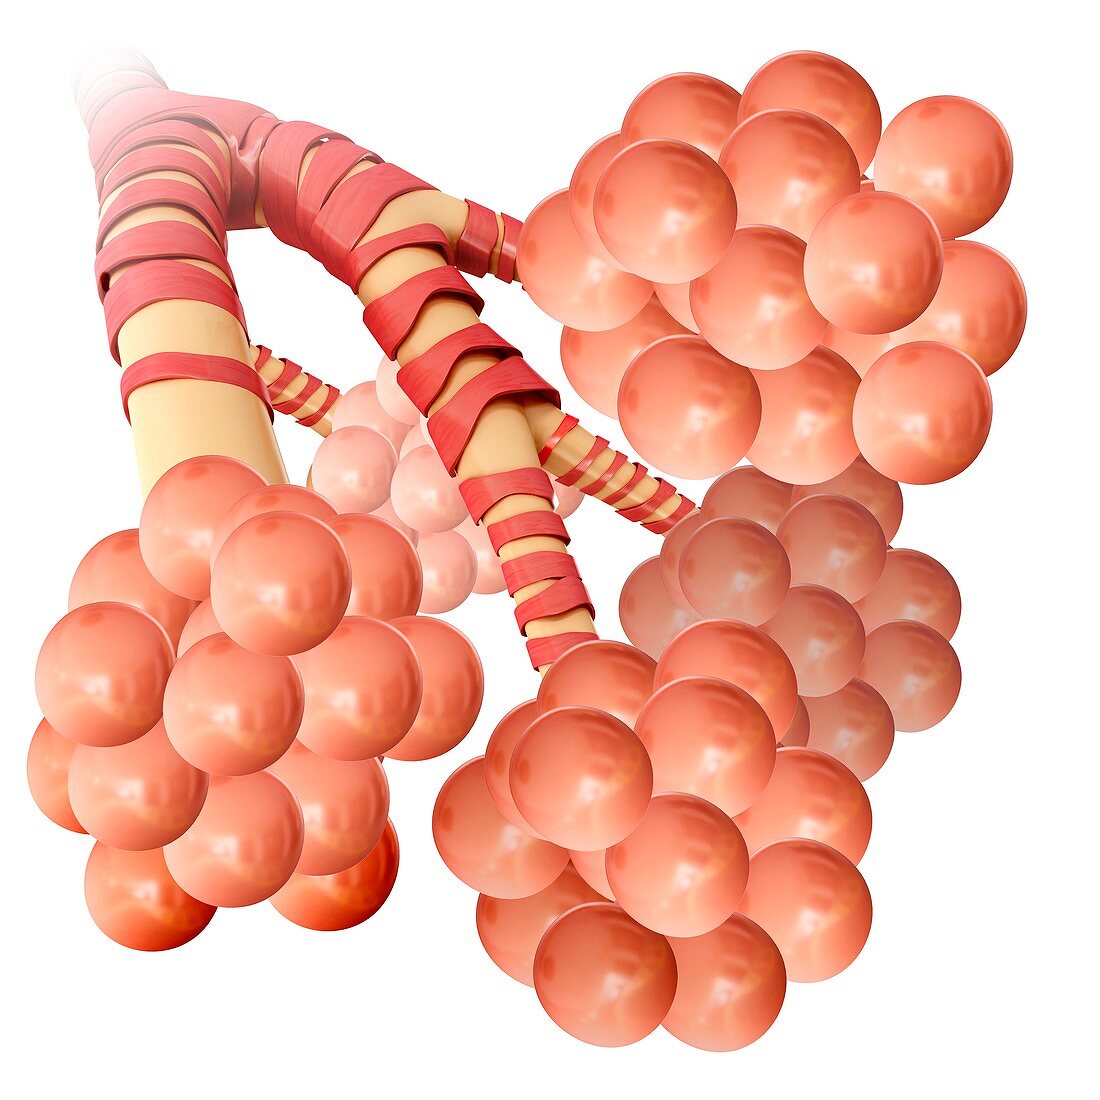 Alveoli clusters in the lungs, illustration